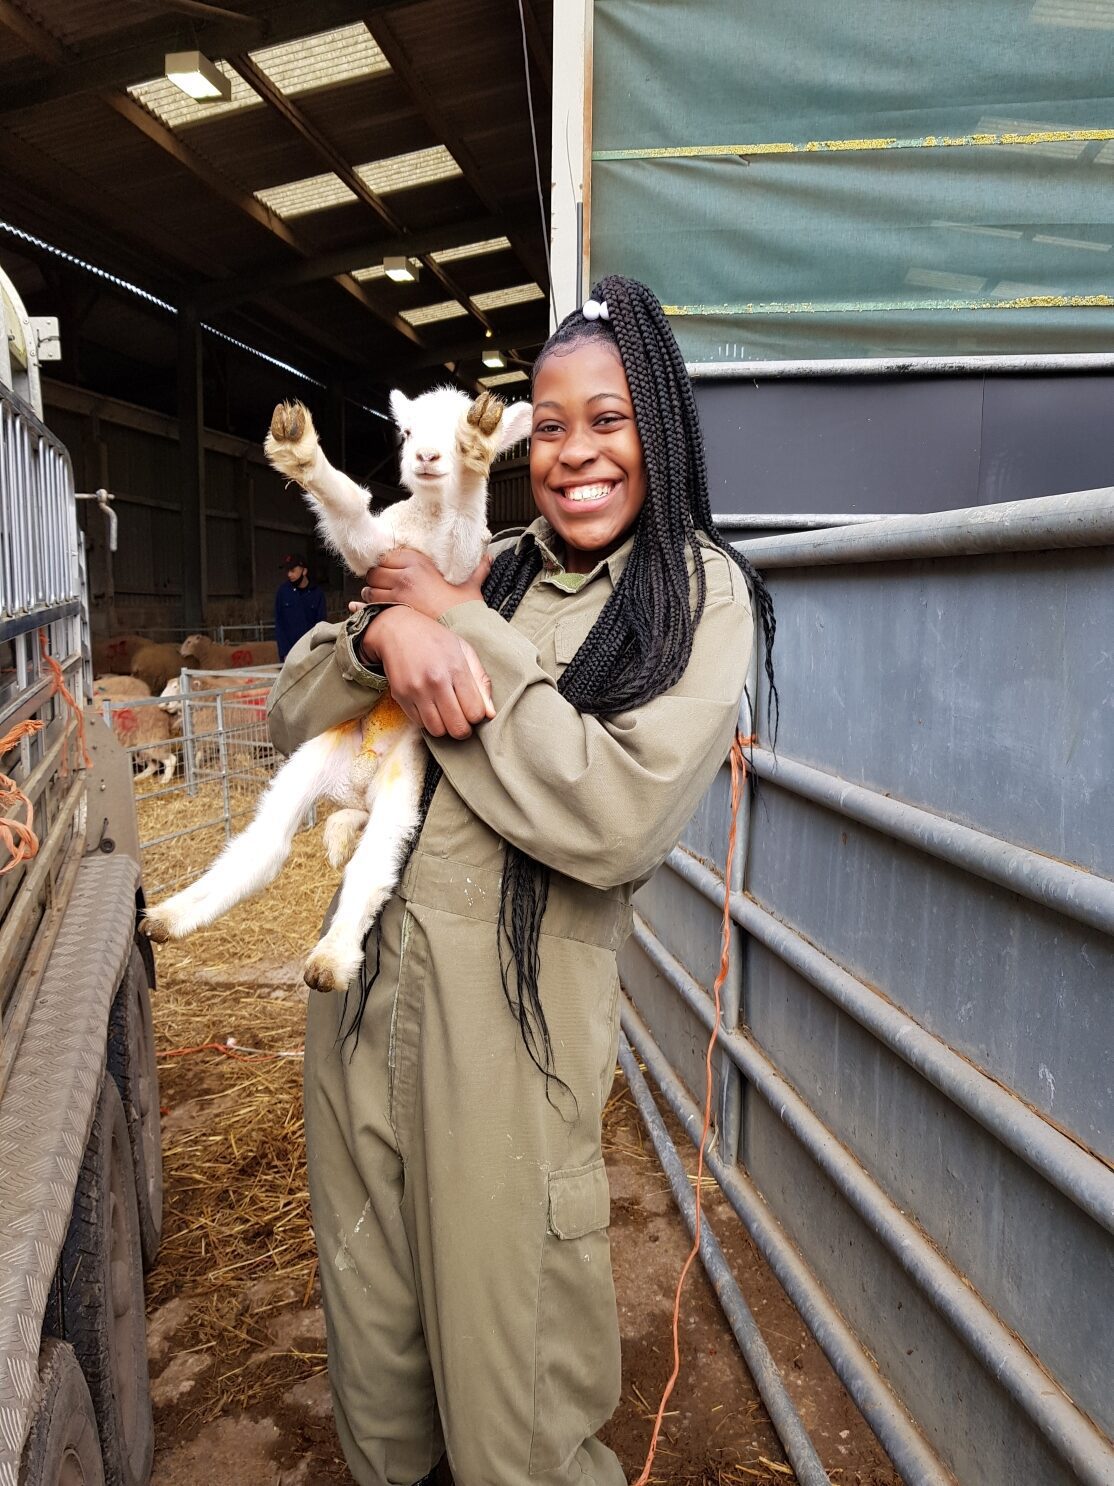 A girl smiling and holding a lamb in her arms